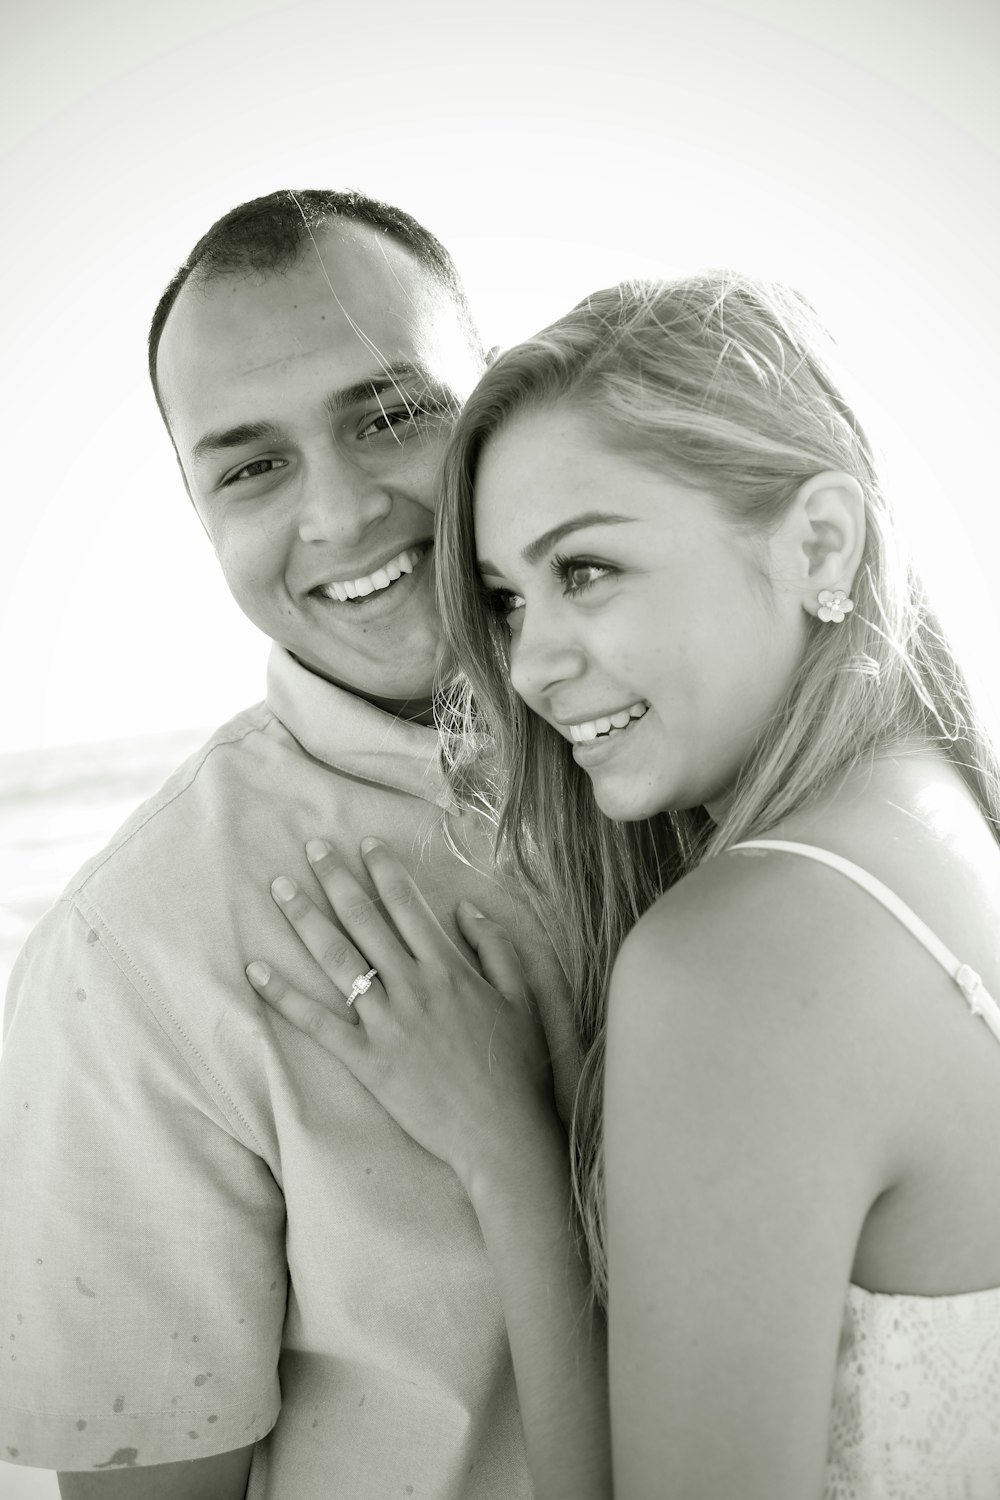 grayscale photo of woman and man smiling